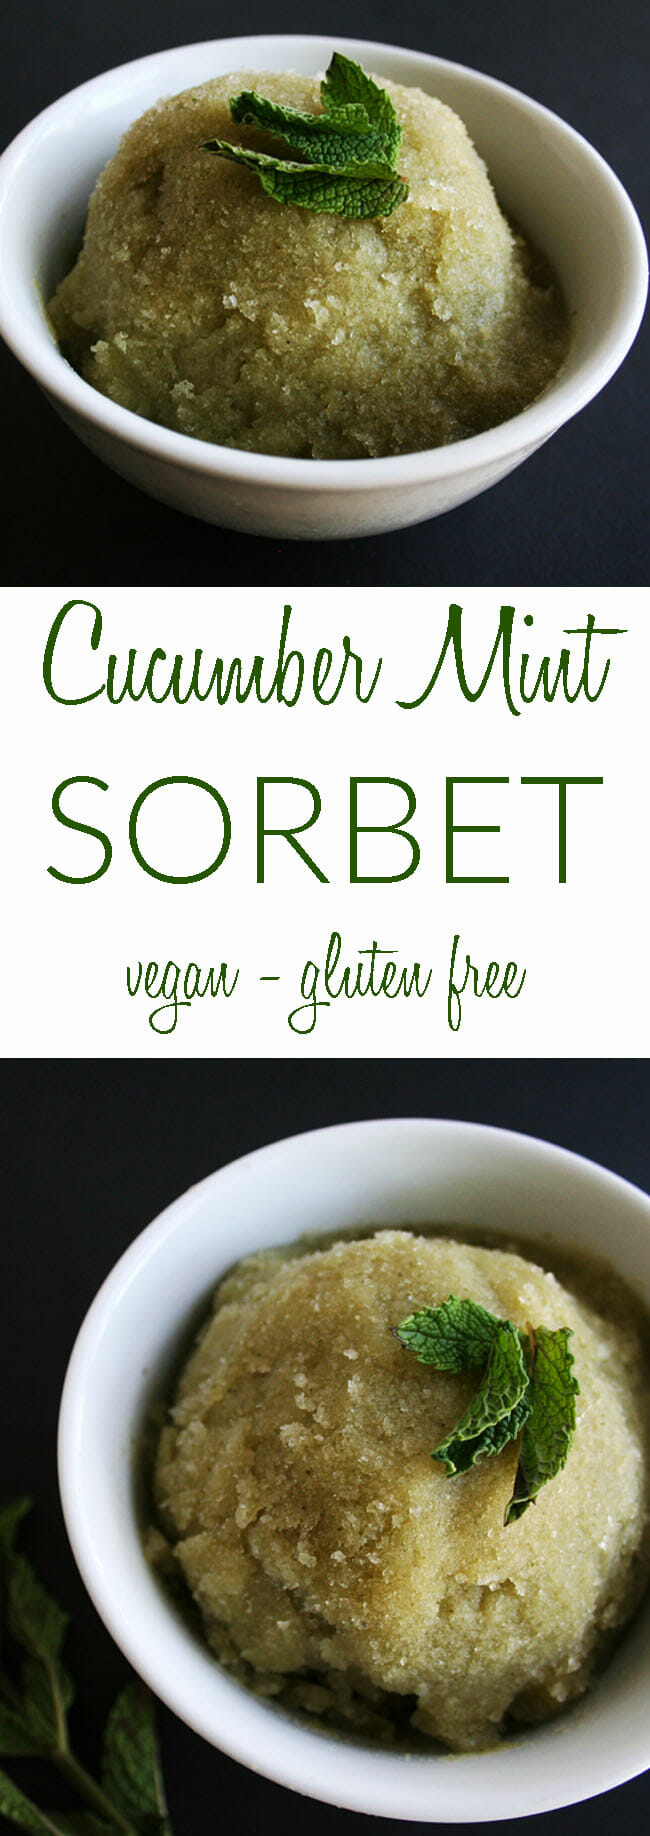 Cucumber Mint Sorbet collage photo with text.